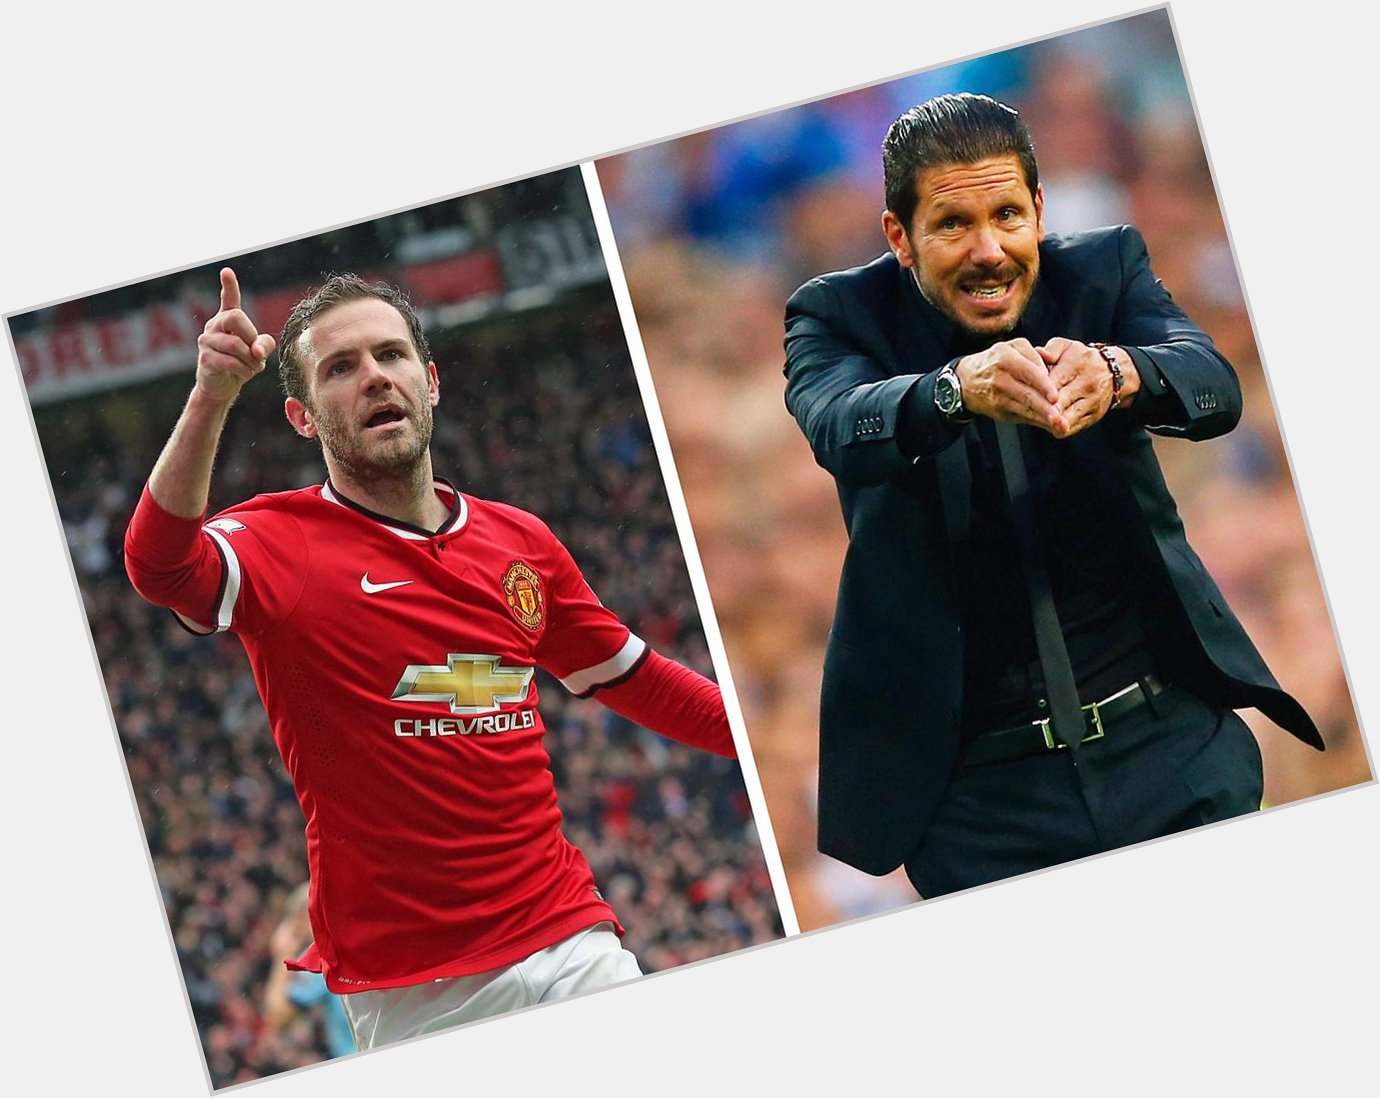 Happy birthday to Man United \s Juan Mata , who turns 27 today. And Atletico Madrid boss Diego Simeone who is 45. 